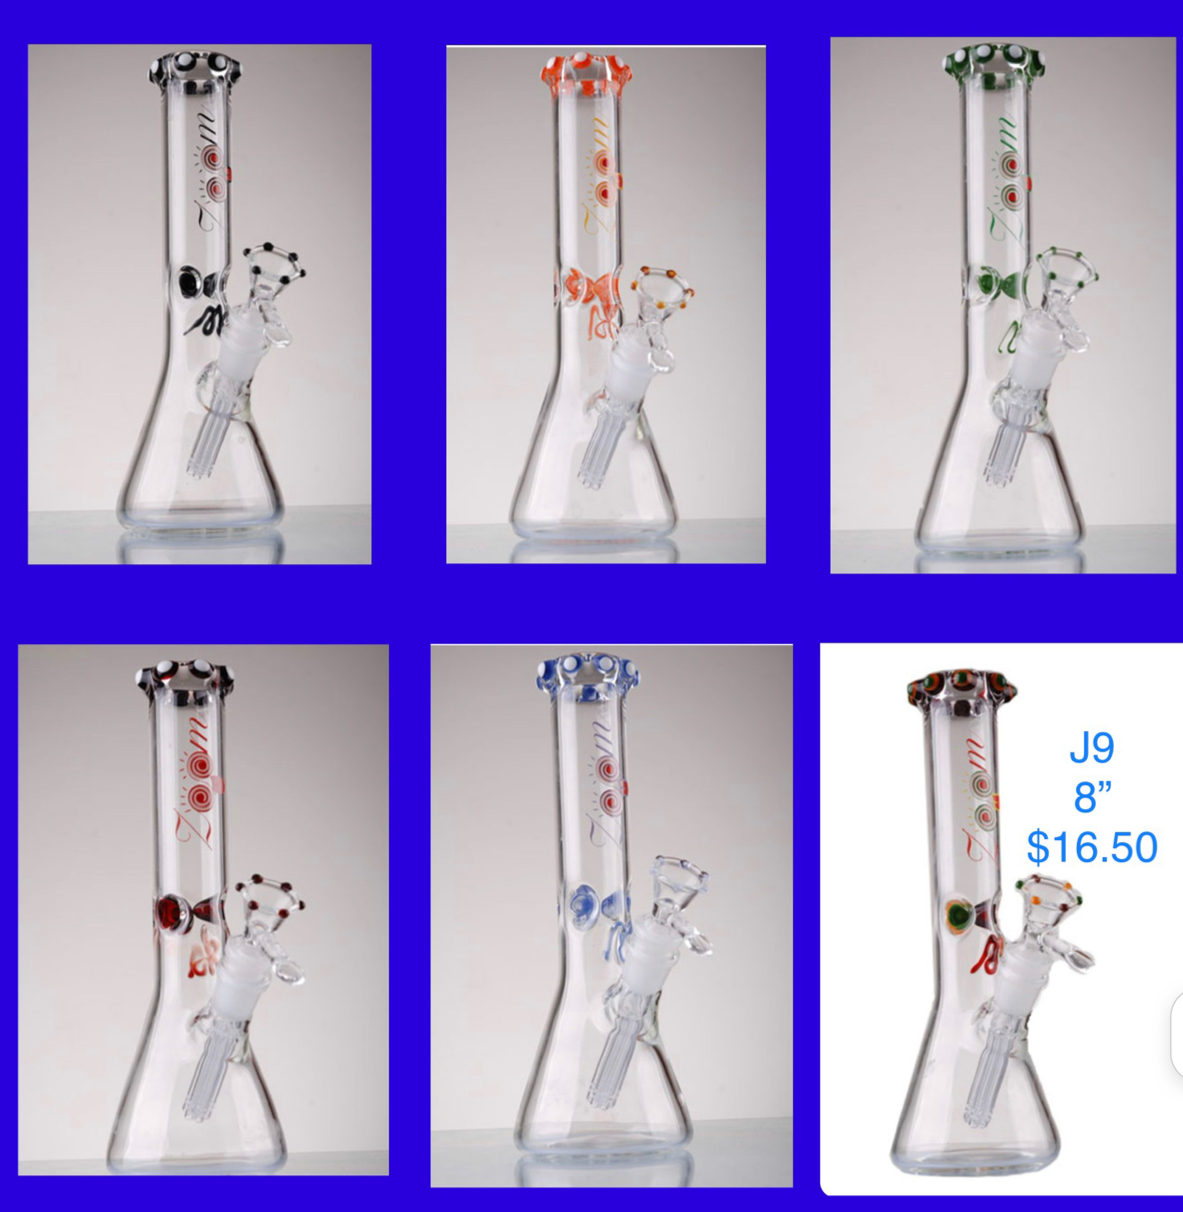 Product for sale: J9 8” Glass Bong-Assorted